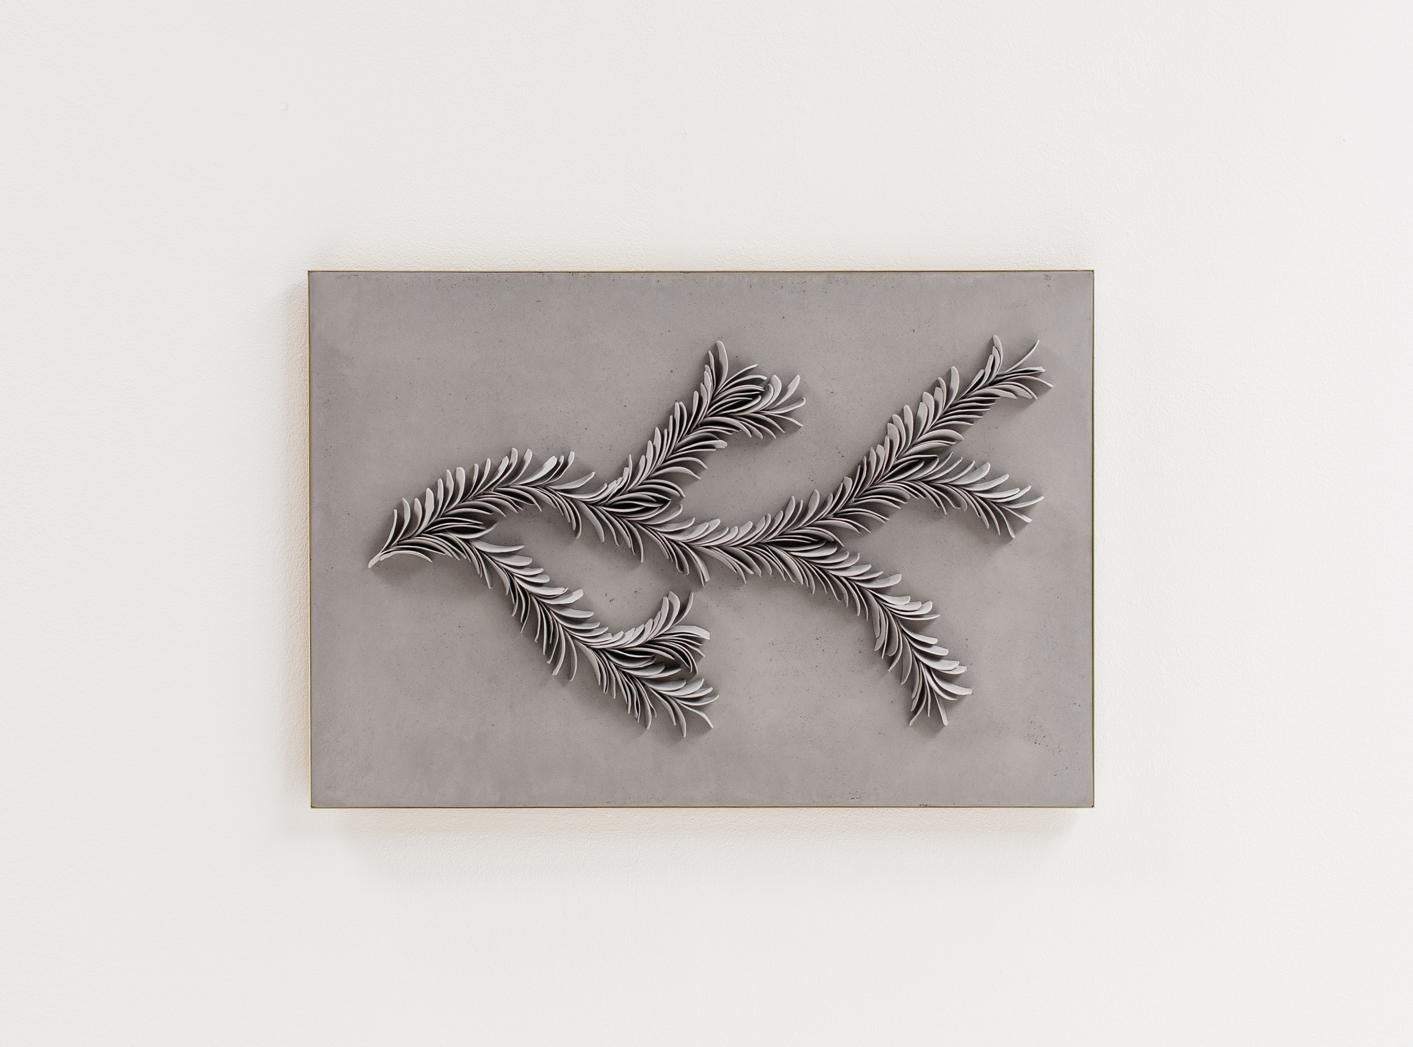 This Branching Porcelain artwork was handmade by Olivia Walker in her studio in Dartmoor National Park in England. All of the porcelain shards are individually made by hand, and applied to a natrual lime plaster surface, creating a branching flow of